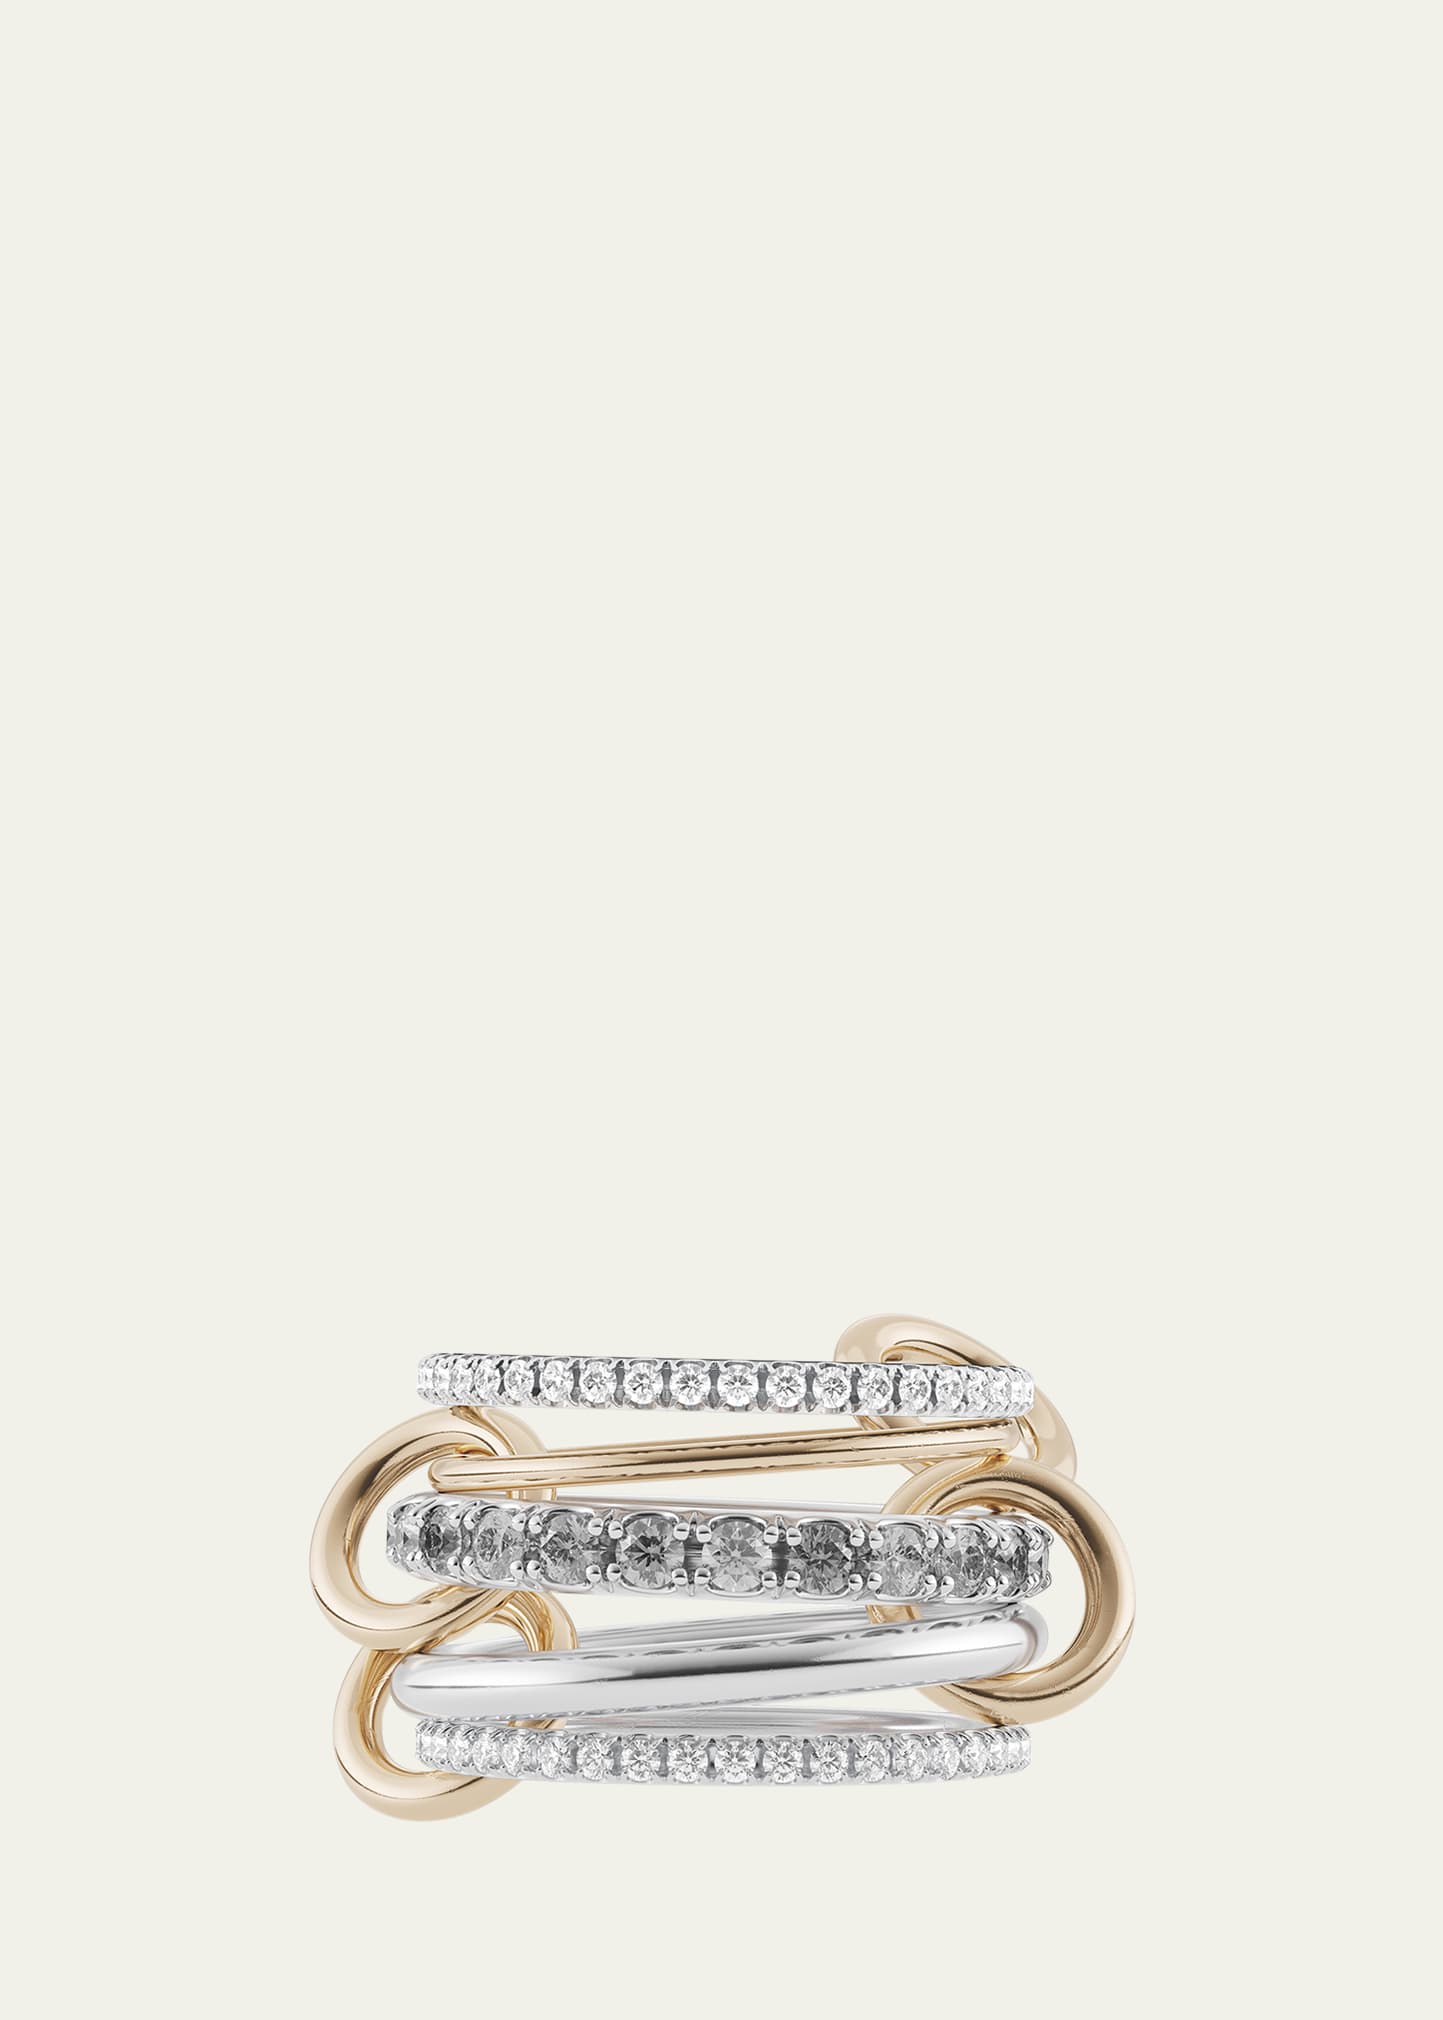 Aquarius SG Gris Five Link Ring in Sterling Silver and 18K Yellow Gold with U Pave Grey and White Diamonds